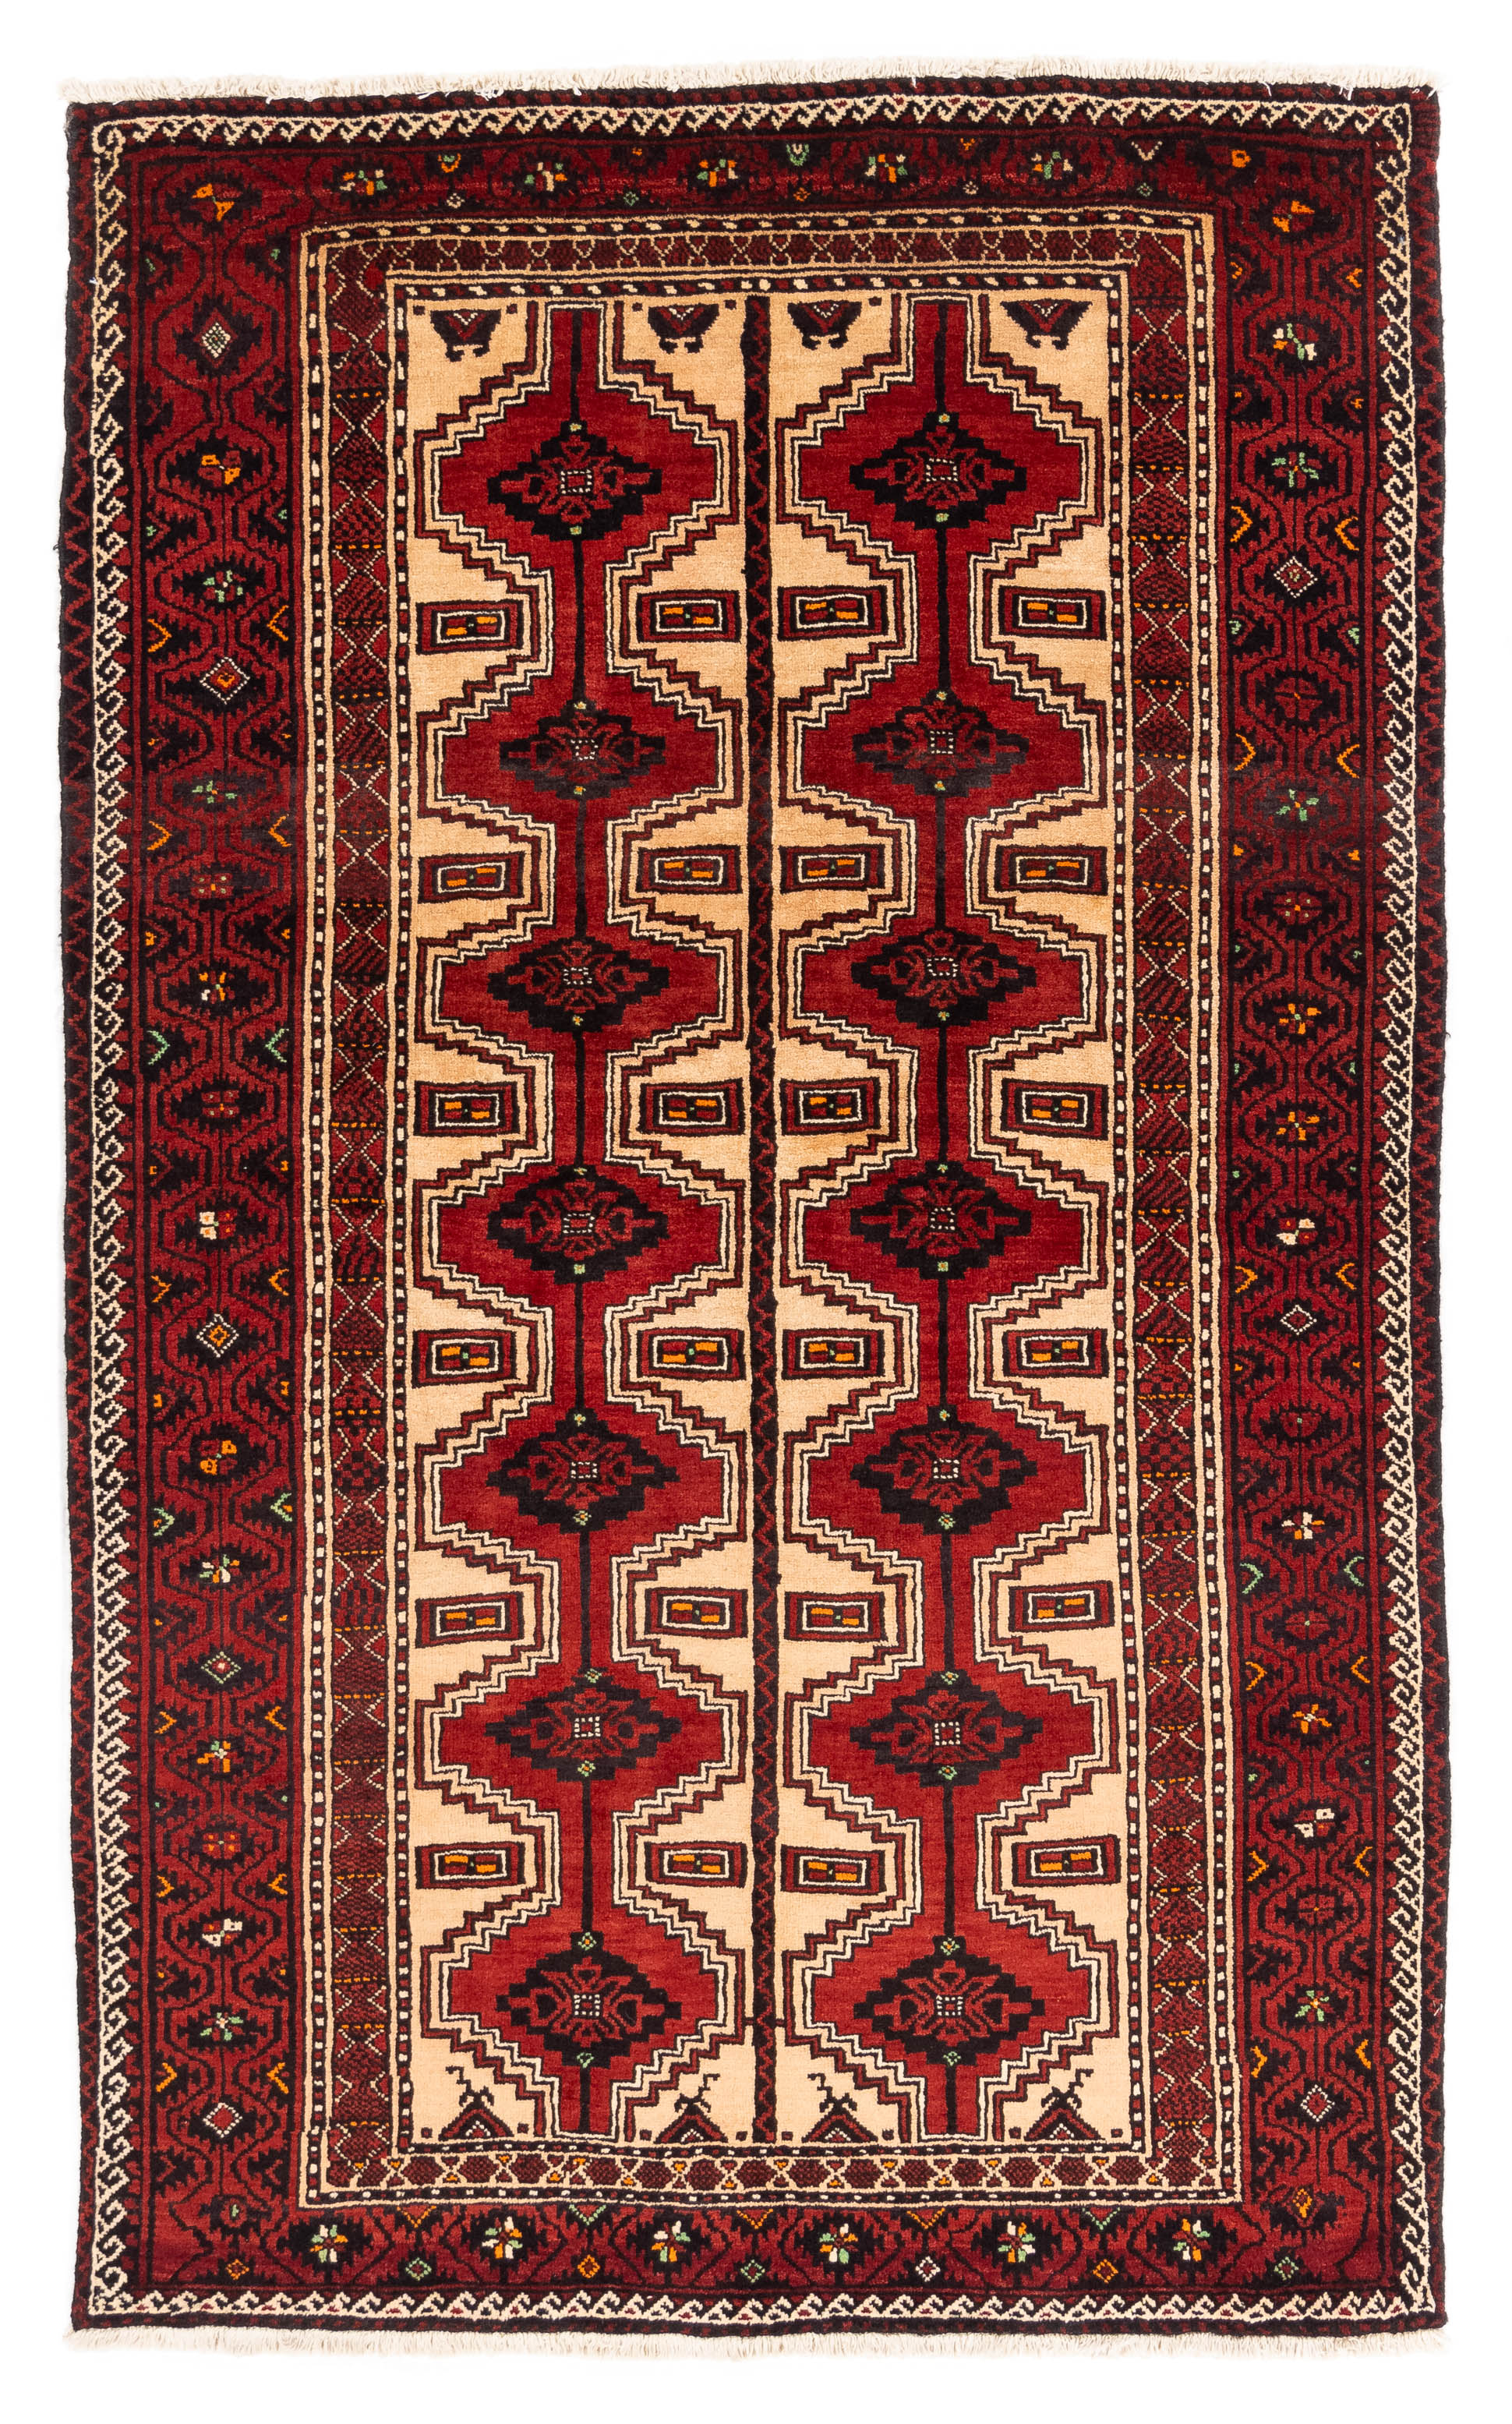 Authentic Handwoven Persian Balouch Rug <br> 4'5 x 7'3